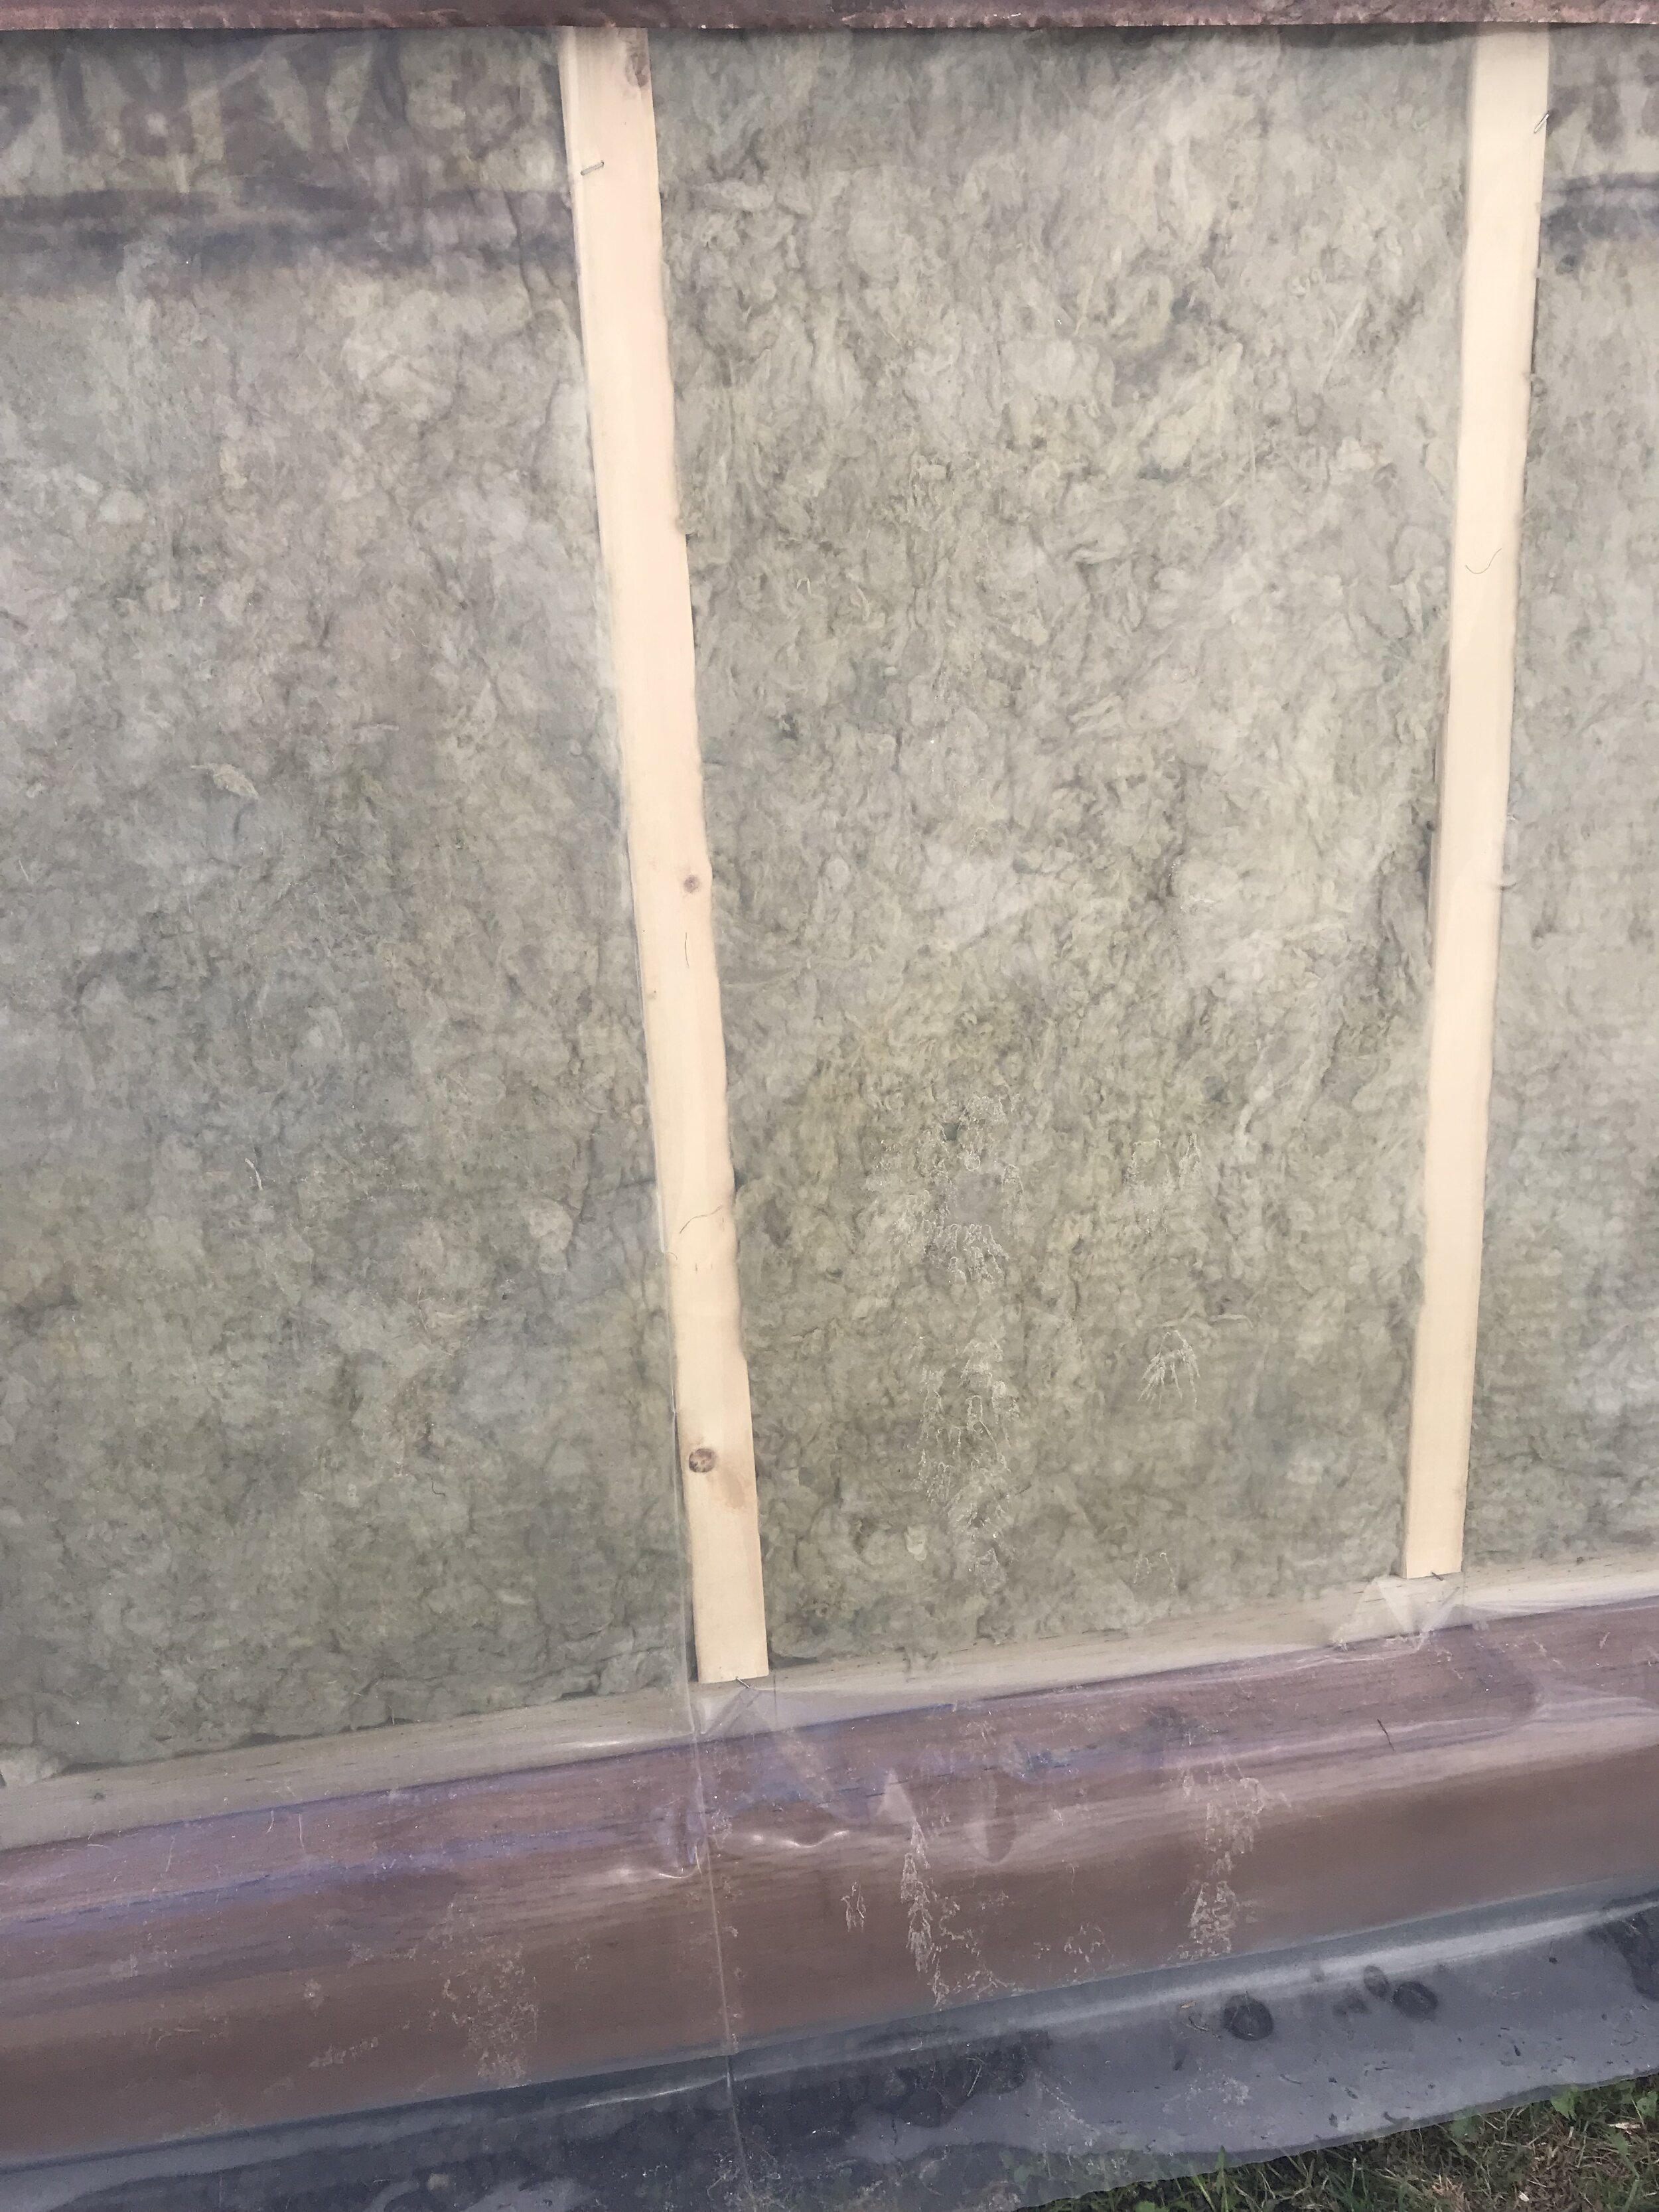 Vapour barrier covers treated foundation wood to prevent chemical leaching into growing bed 